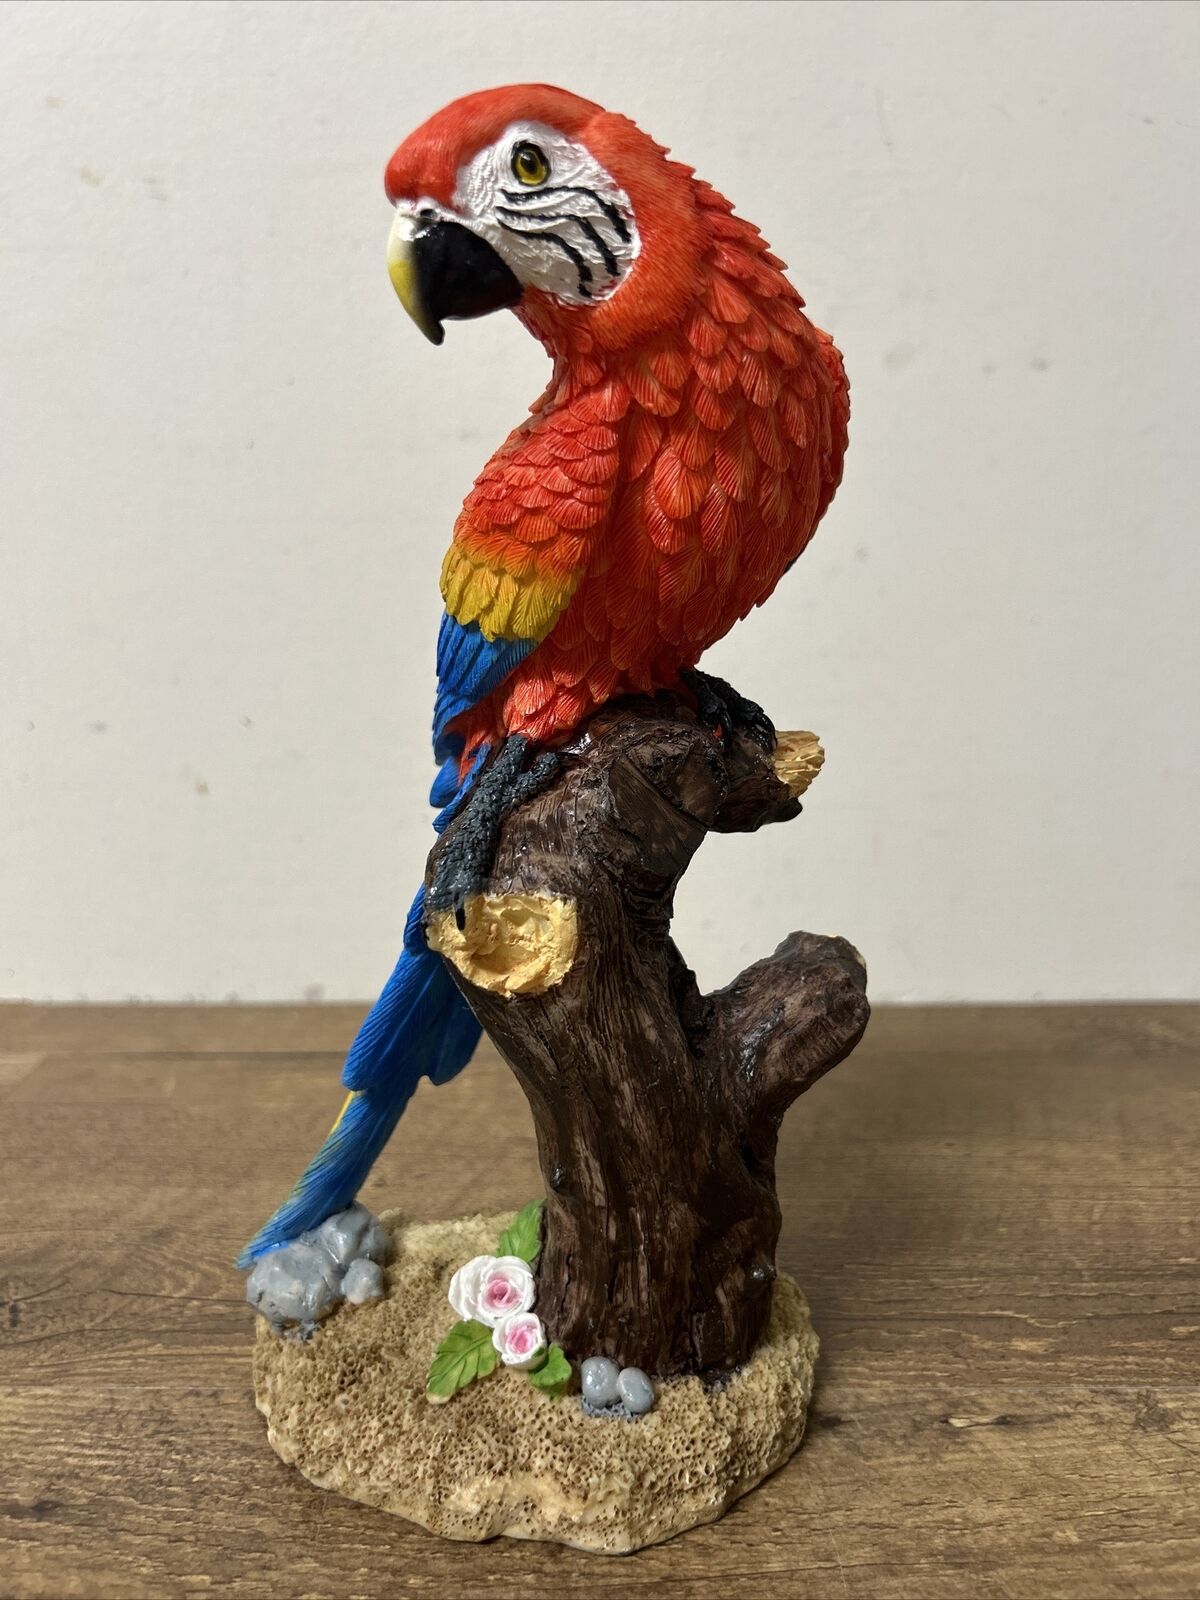 Vintage tropical Parrot Macaw Figurine Colorful Bird Figure 9” tall (Resin) -A